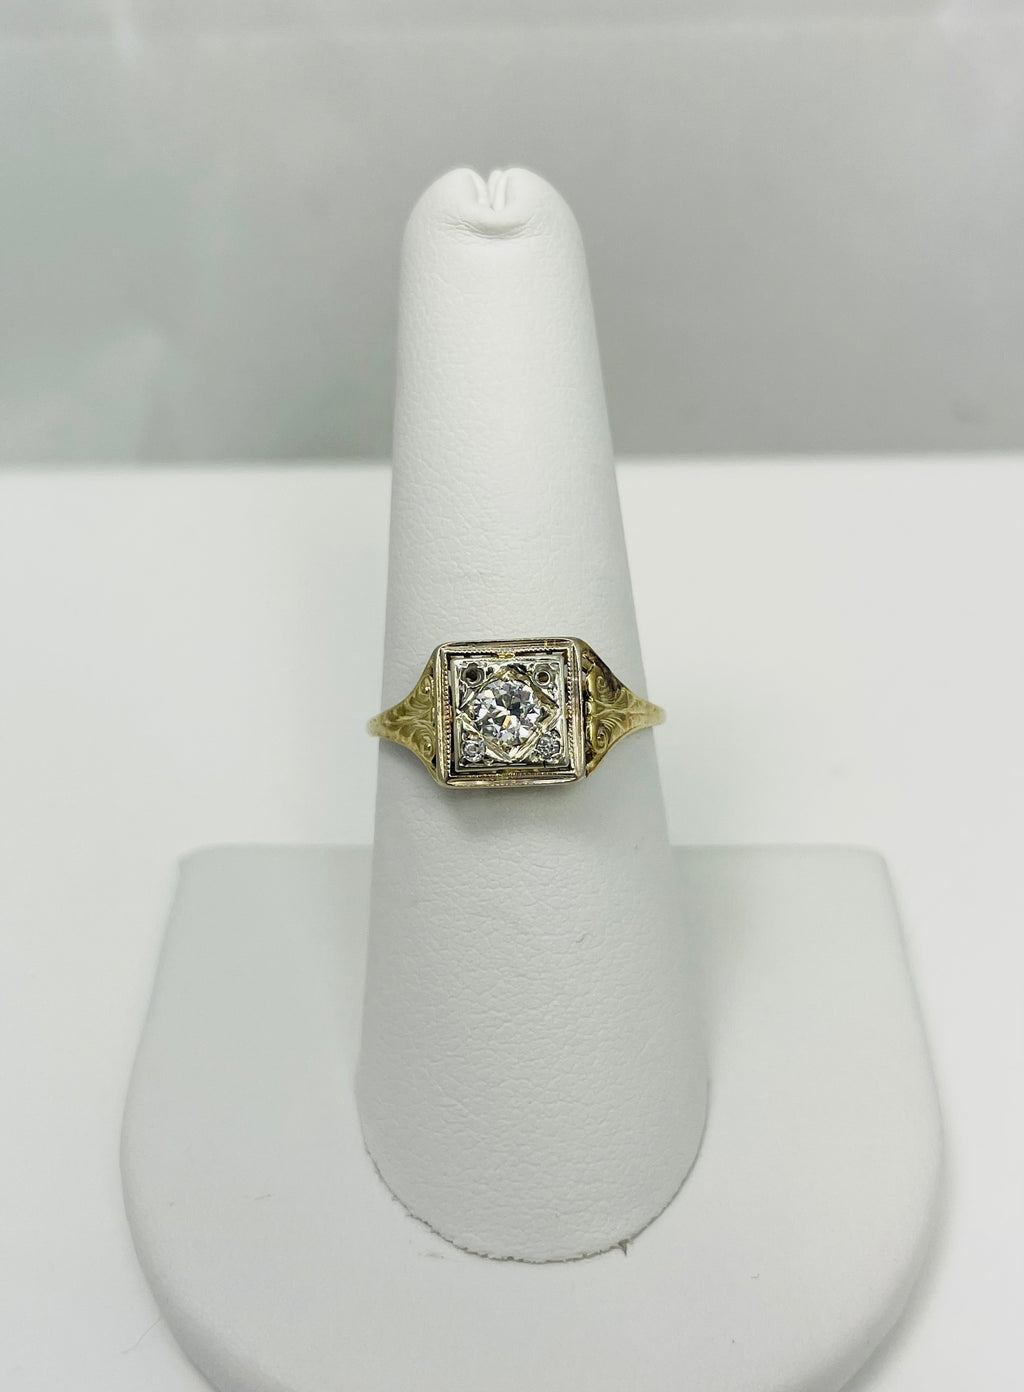 Early 1900s 14k Two Tone Gold European Diamond Engagement Ring